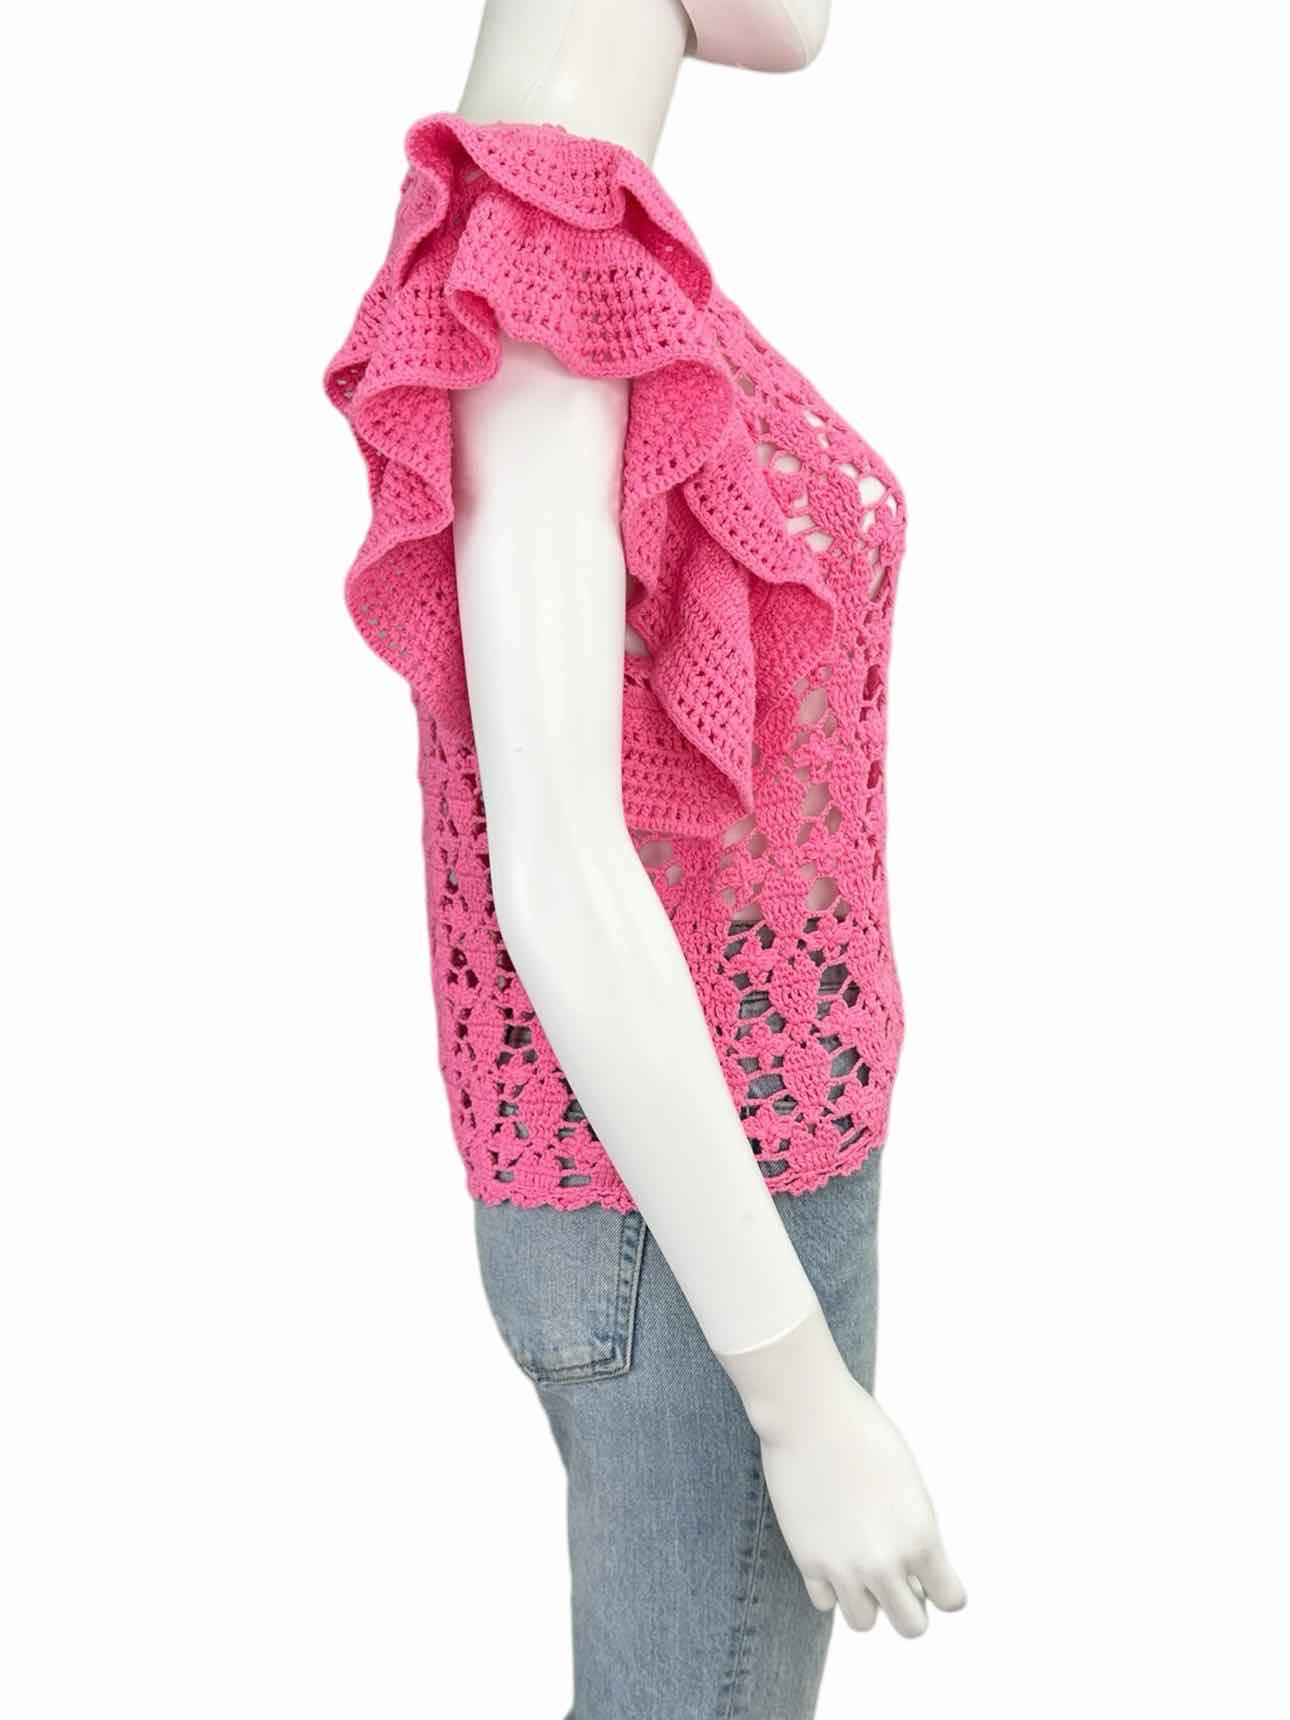 Saltwater Luxe NWT Pink Senna Sweater Size L